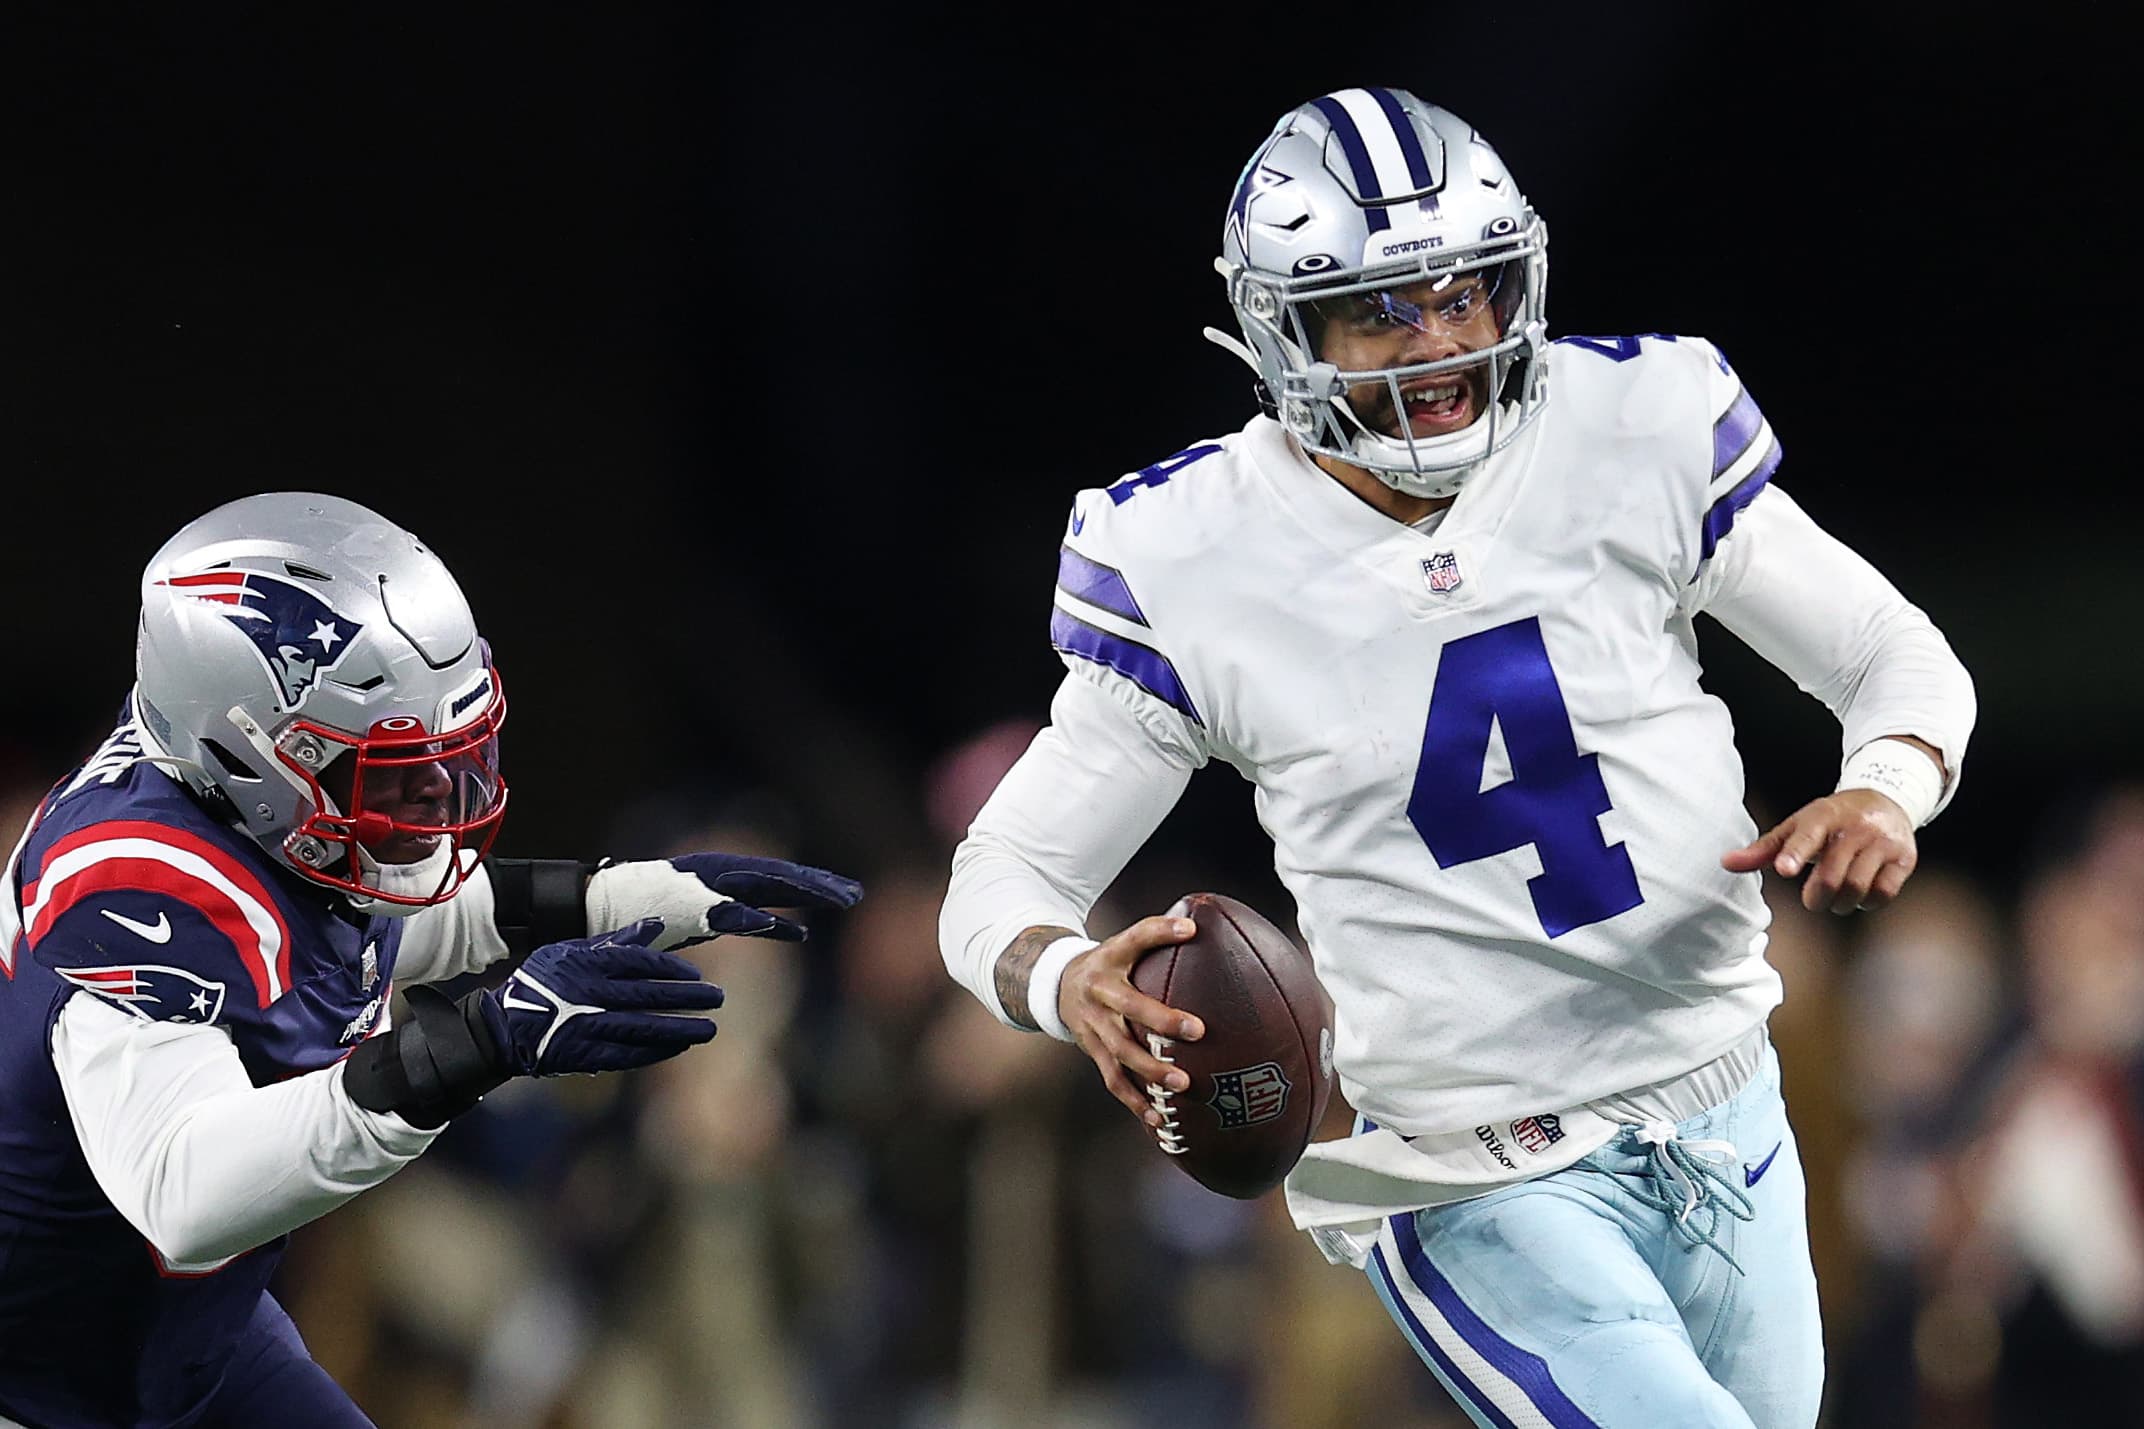 The Dallas Cowboys are back and fans of 'America's Team' are elated over the NFL's richest franchise